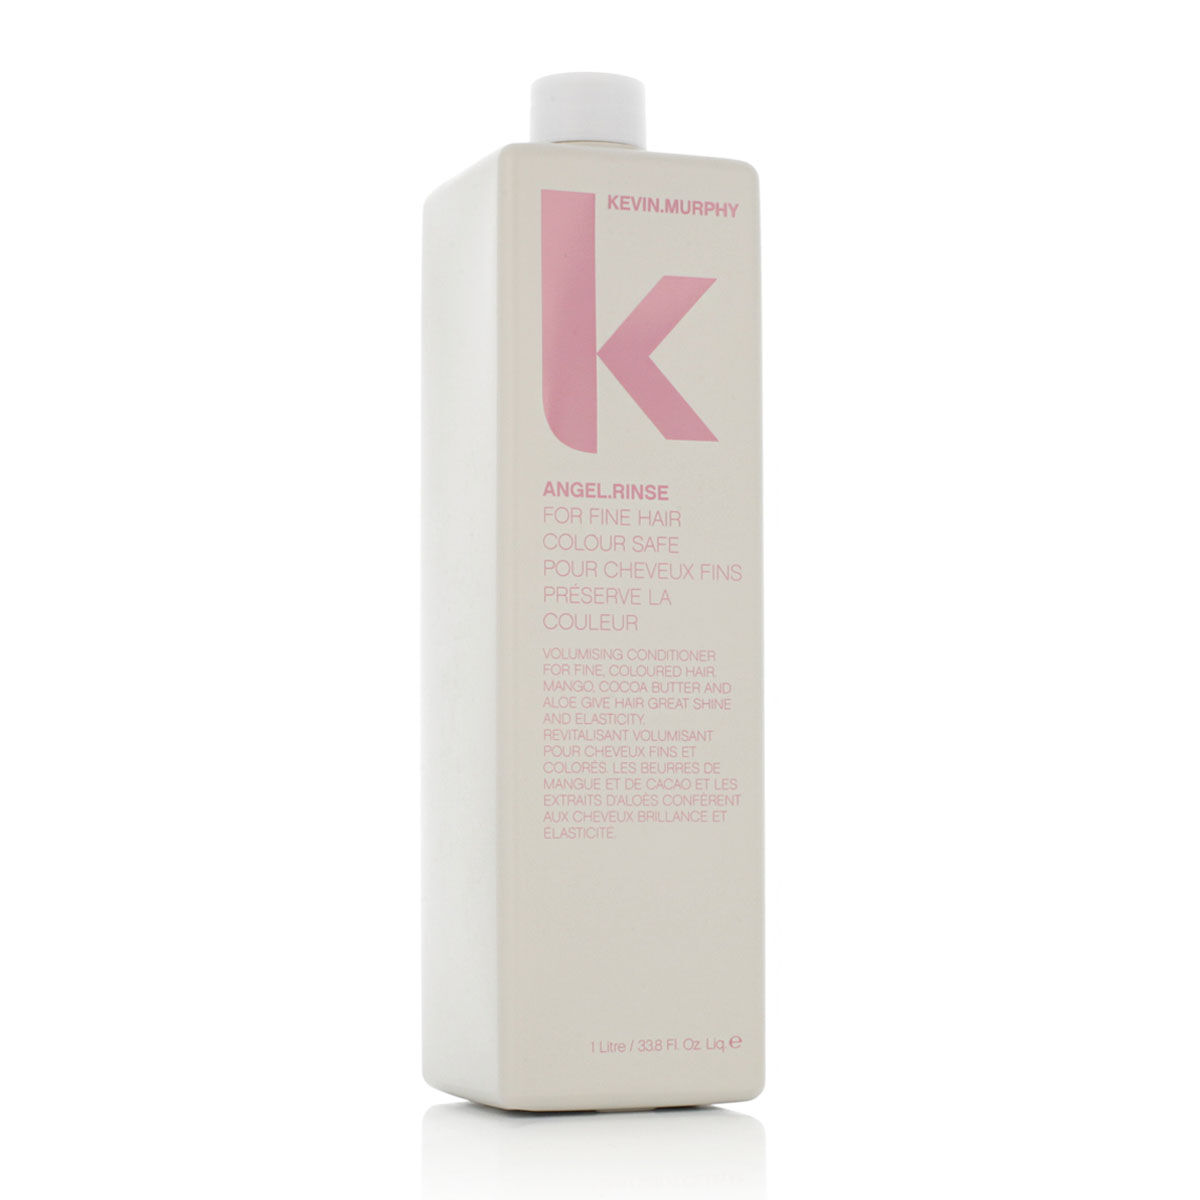 Conditioner Kevin Murphy Angel Rinse 1 L